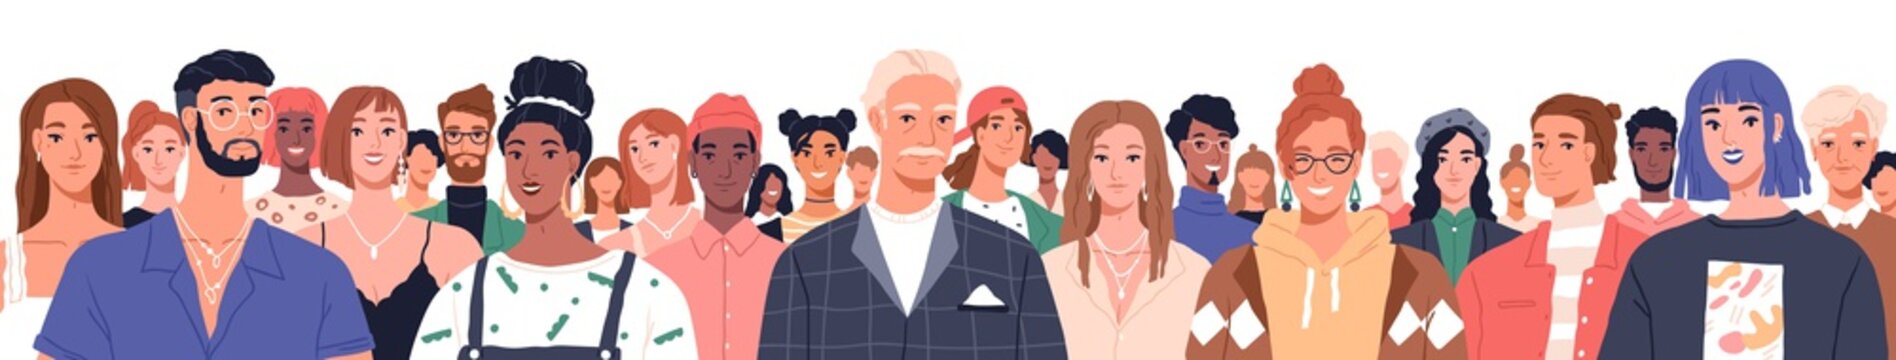 Portrait of diverse people standing together vector flat illustration. Group man and woman of different nationality and ages isolated. United of various generations. Social diversity or population